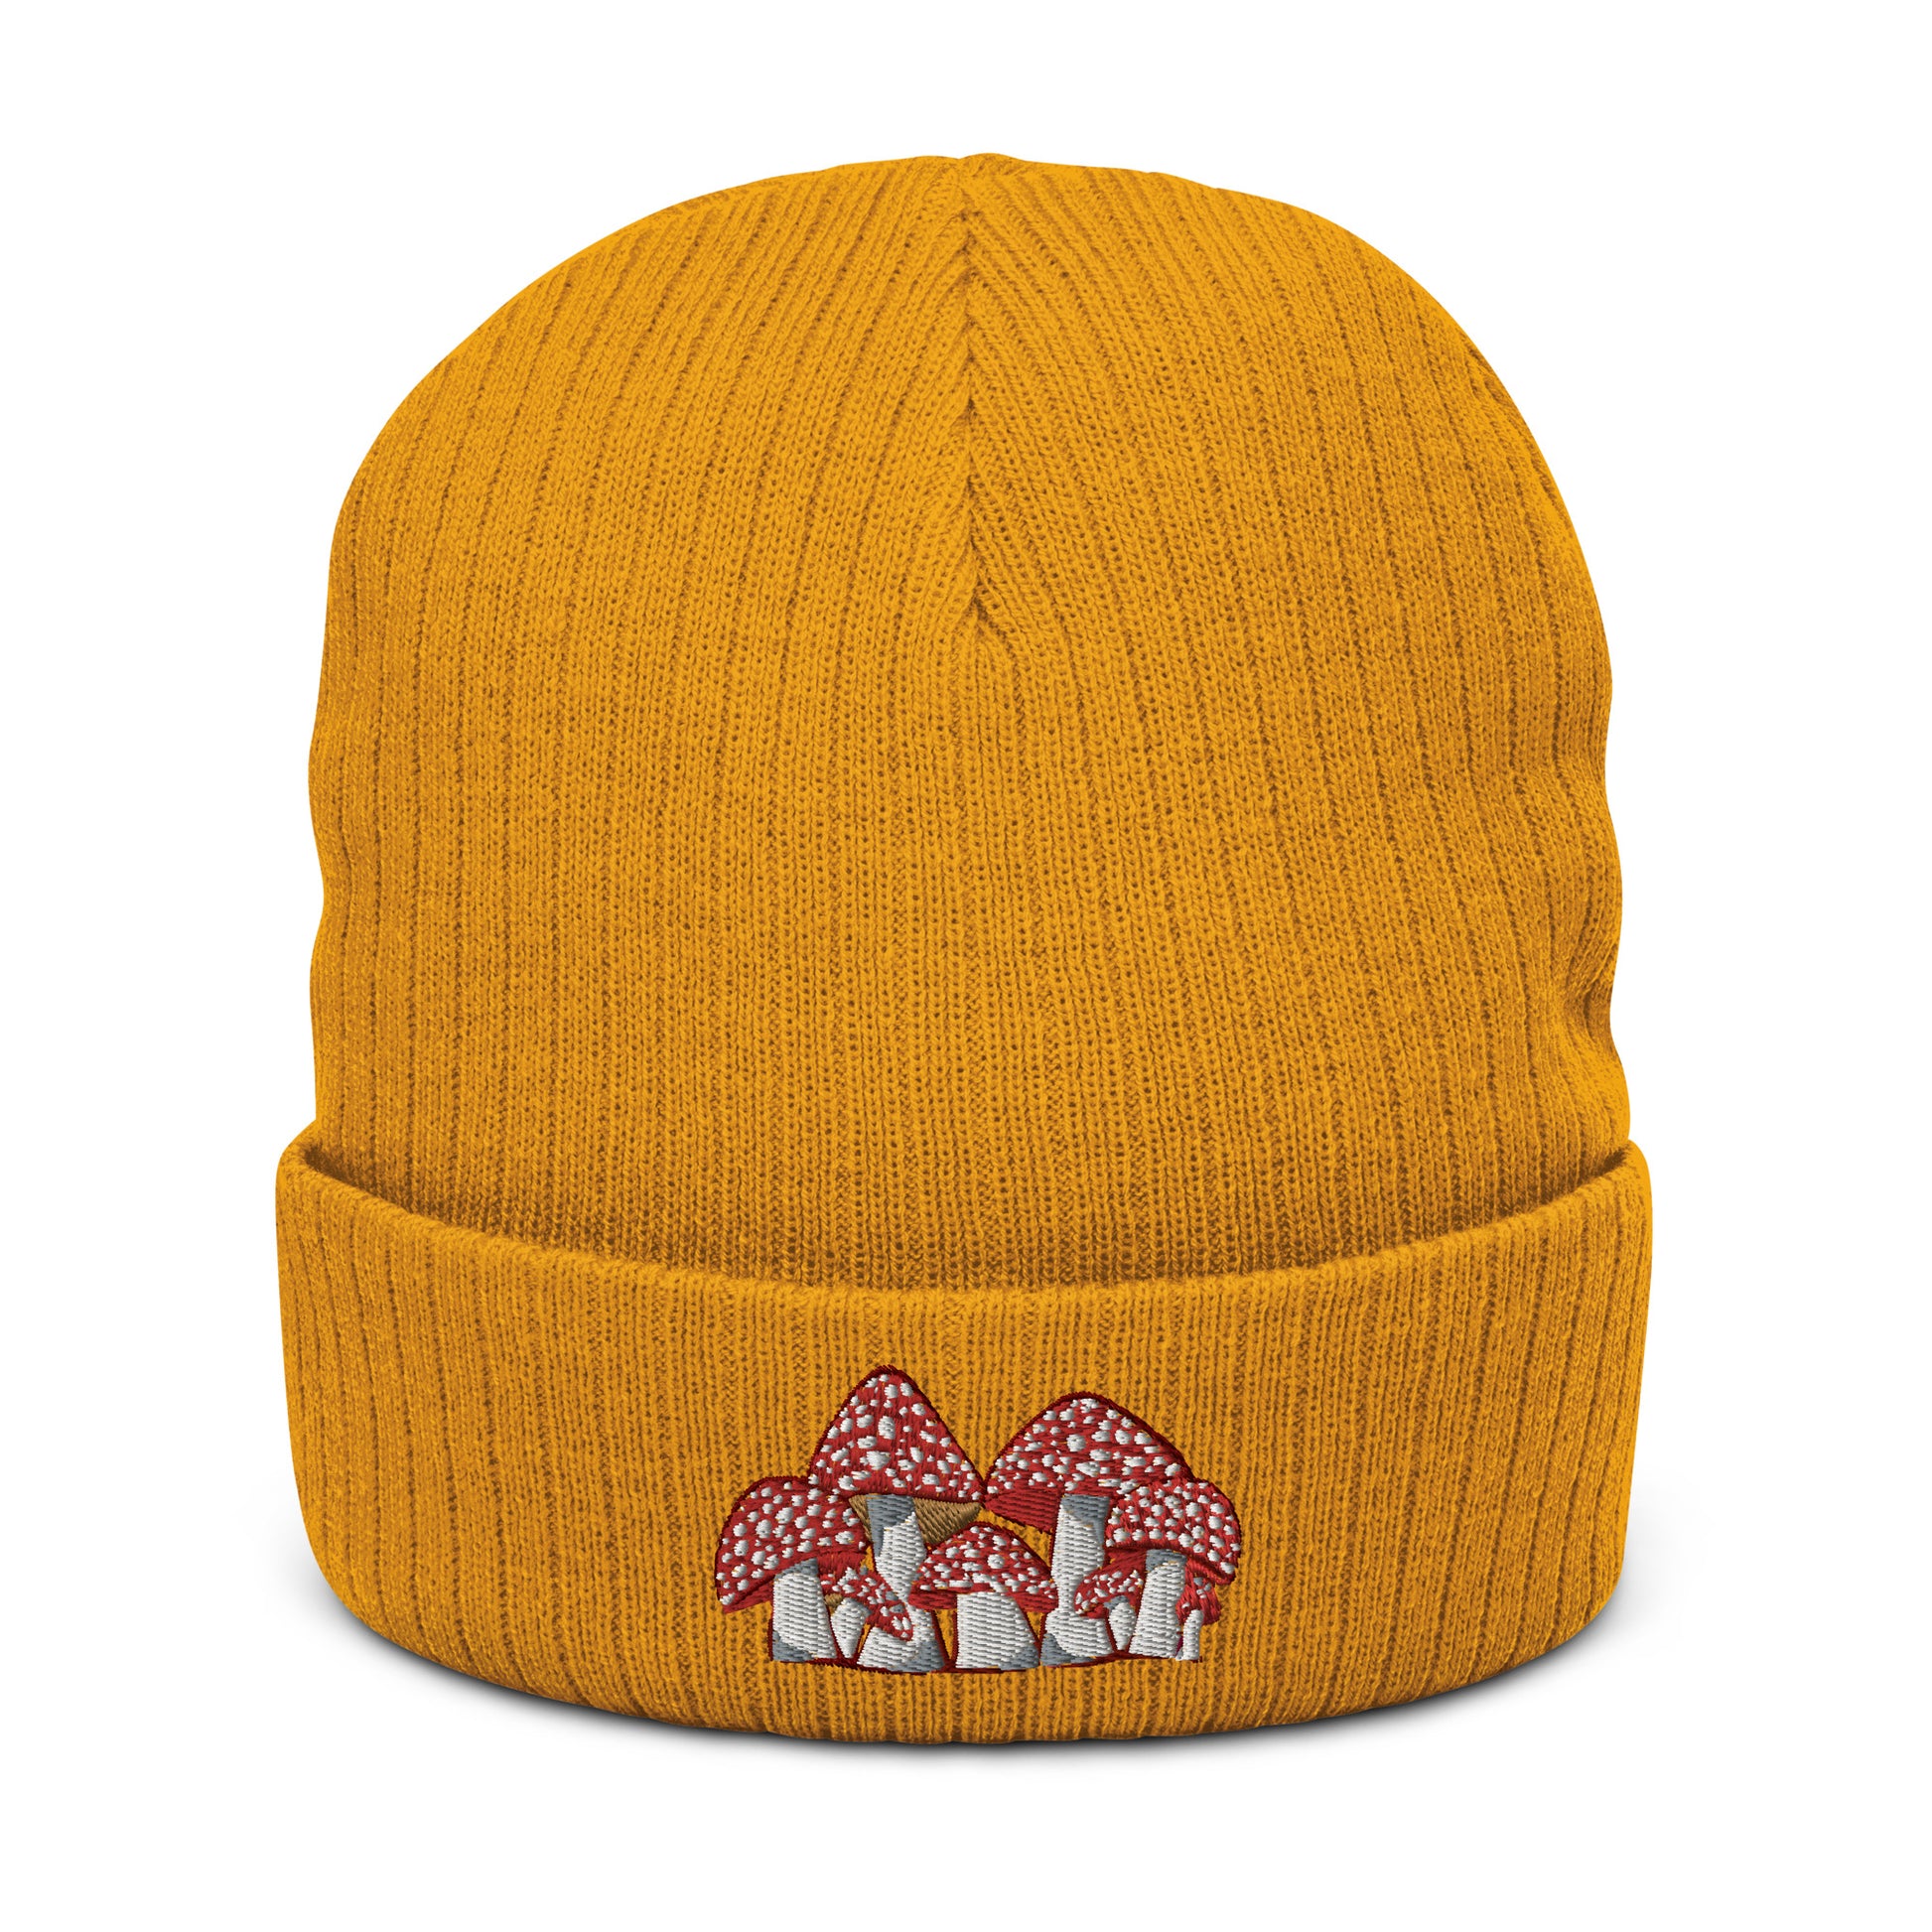 A mustard yellow ribbed knit beanie has an embroidery of Fly Agaric mushrooms on the front.